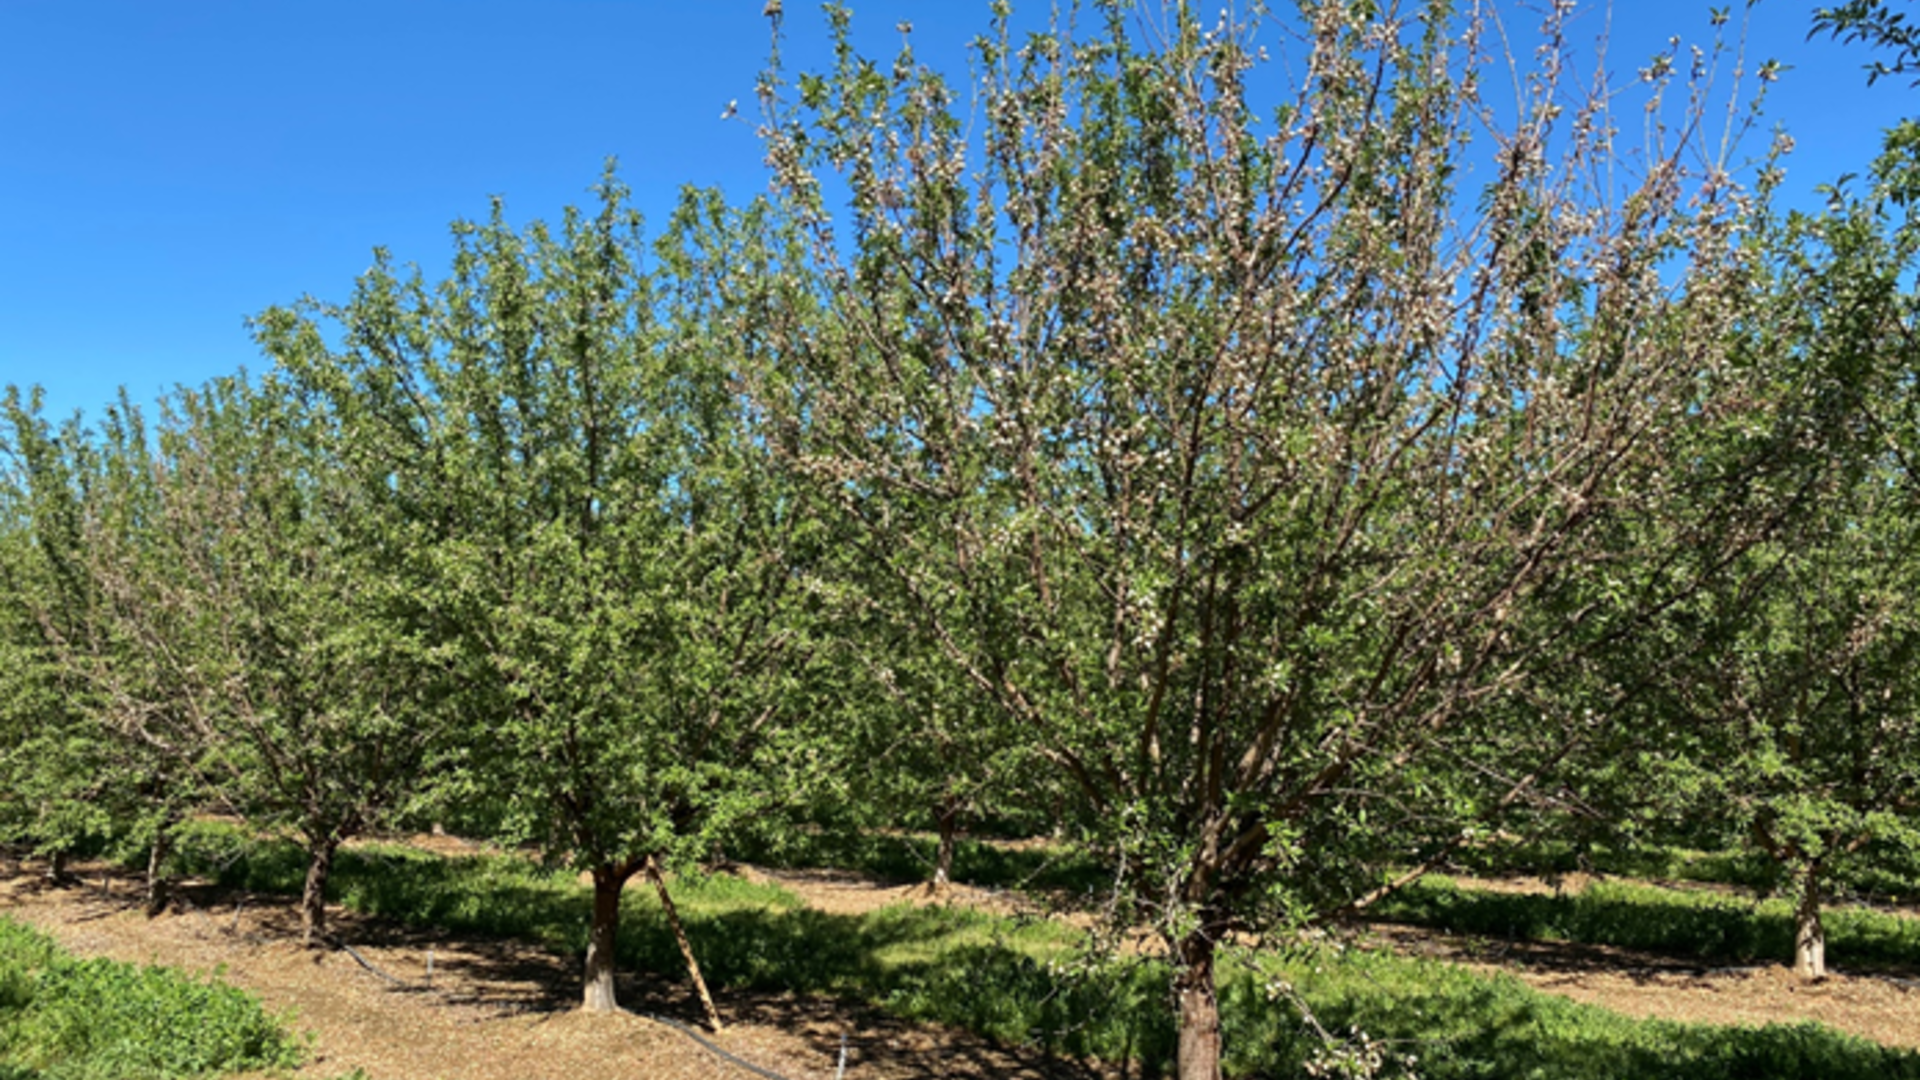 Almond Leafout Failure Seems Related to Wet Springs